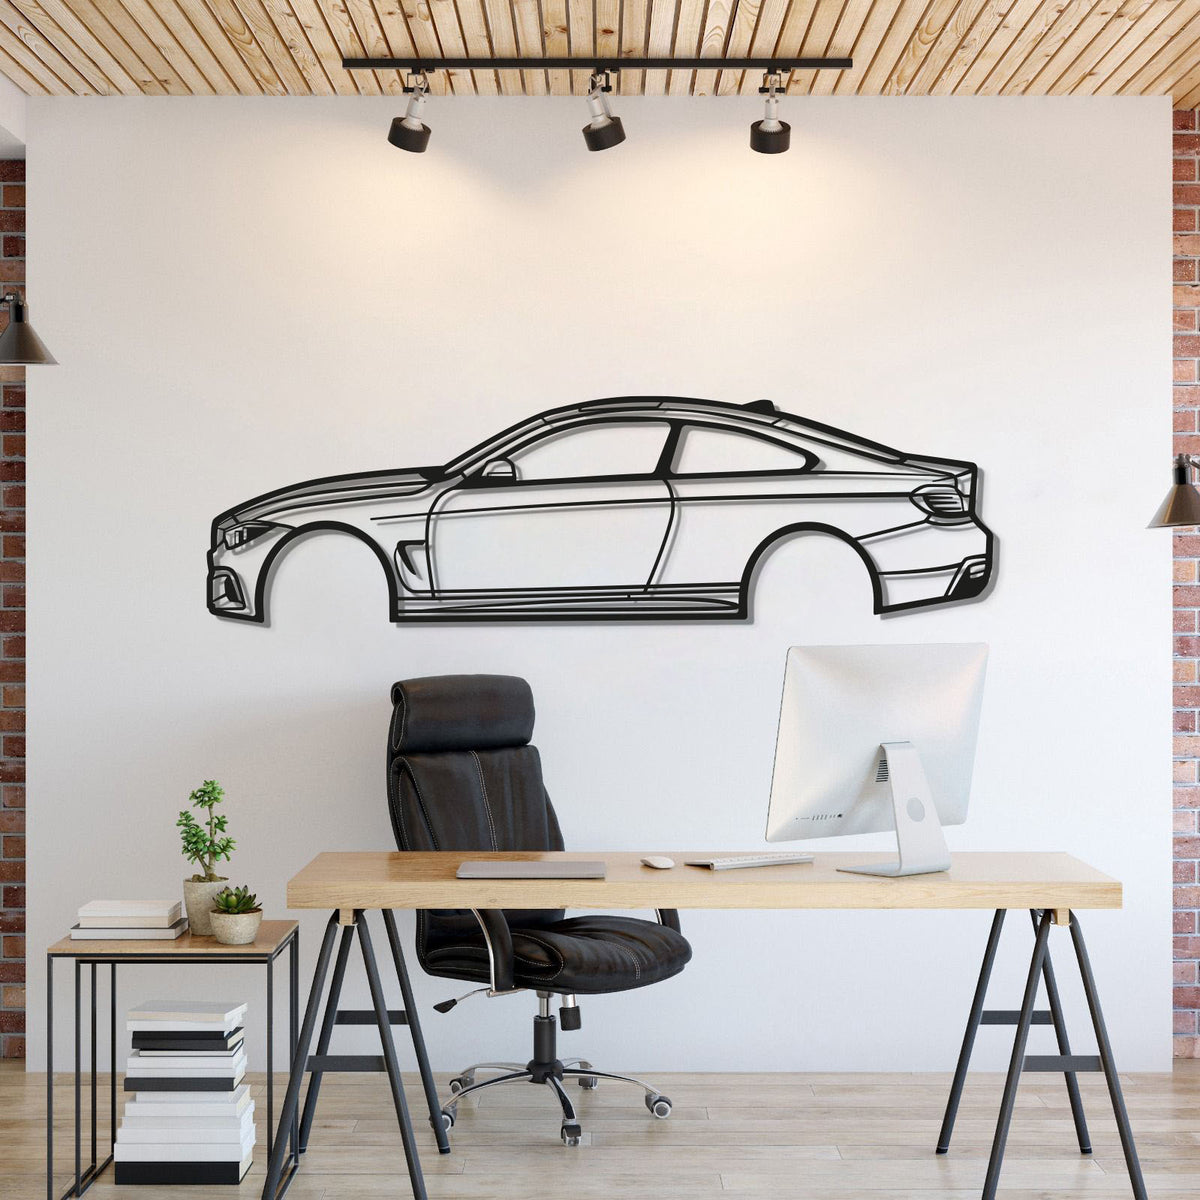 2014 4 SERIE COUPE Metal Car Wall Art - MT0496